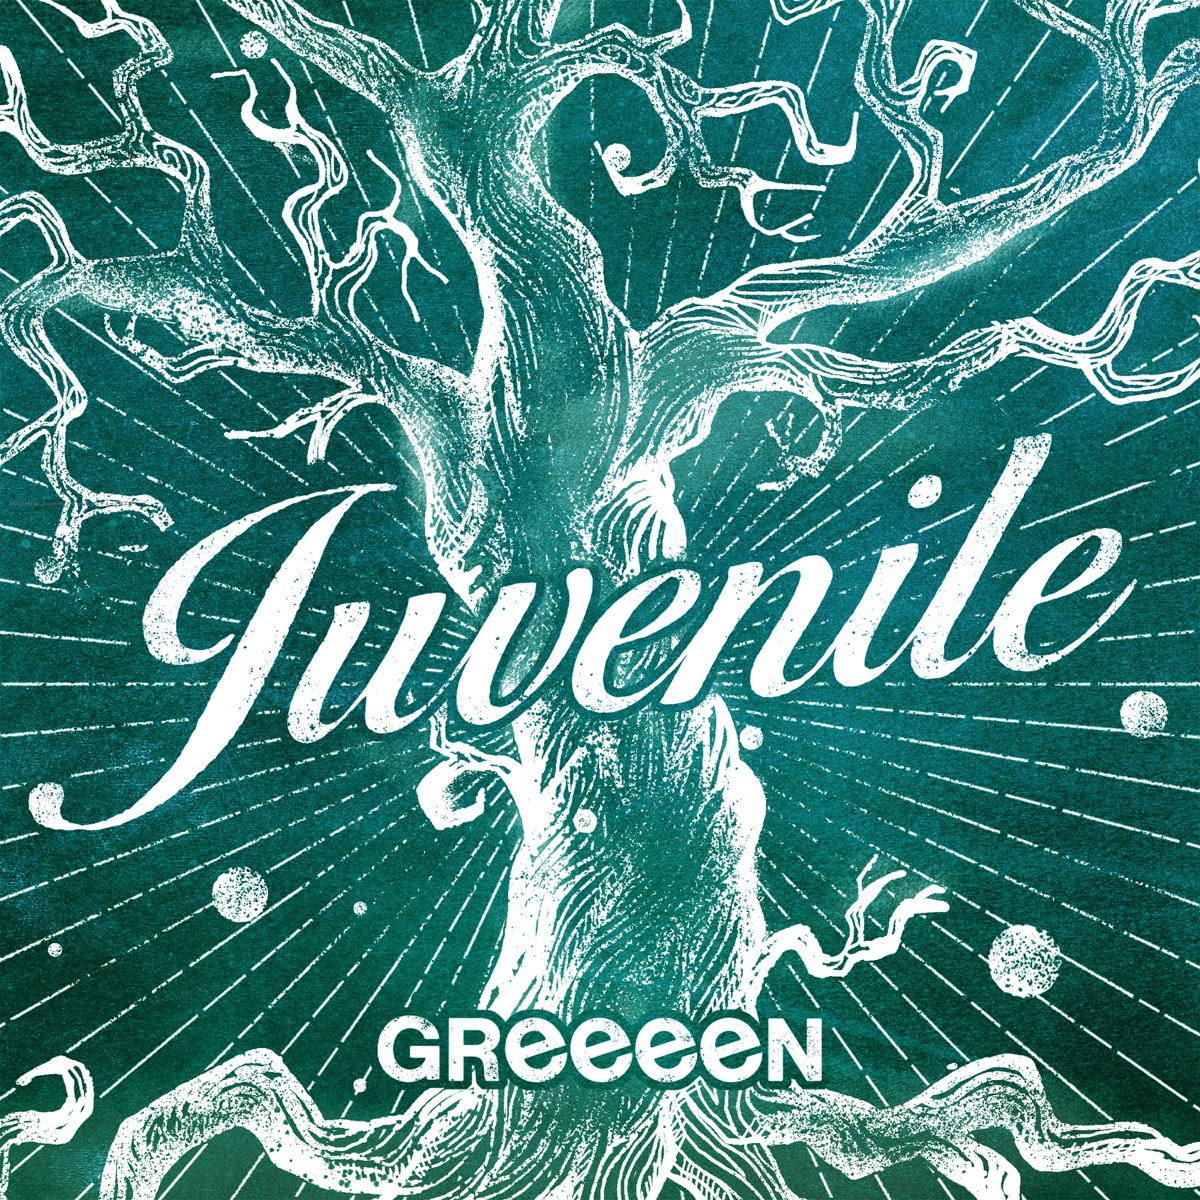 Cover art for『GReeeeN - Juvenile』from the release『Juvenile』